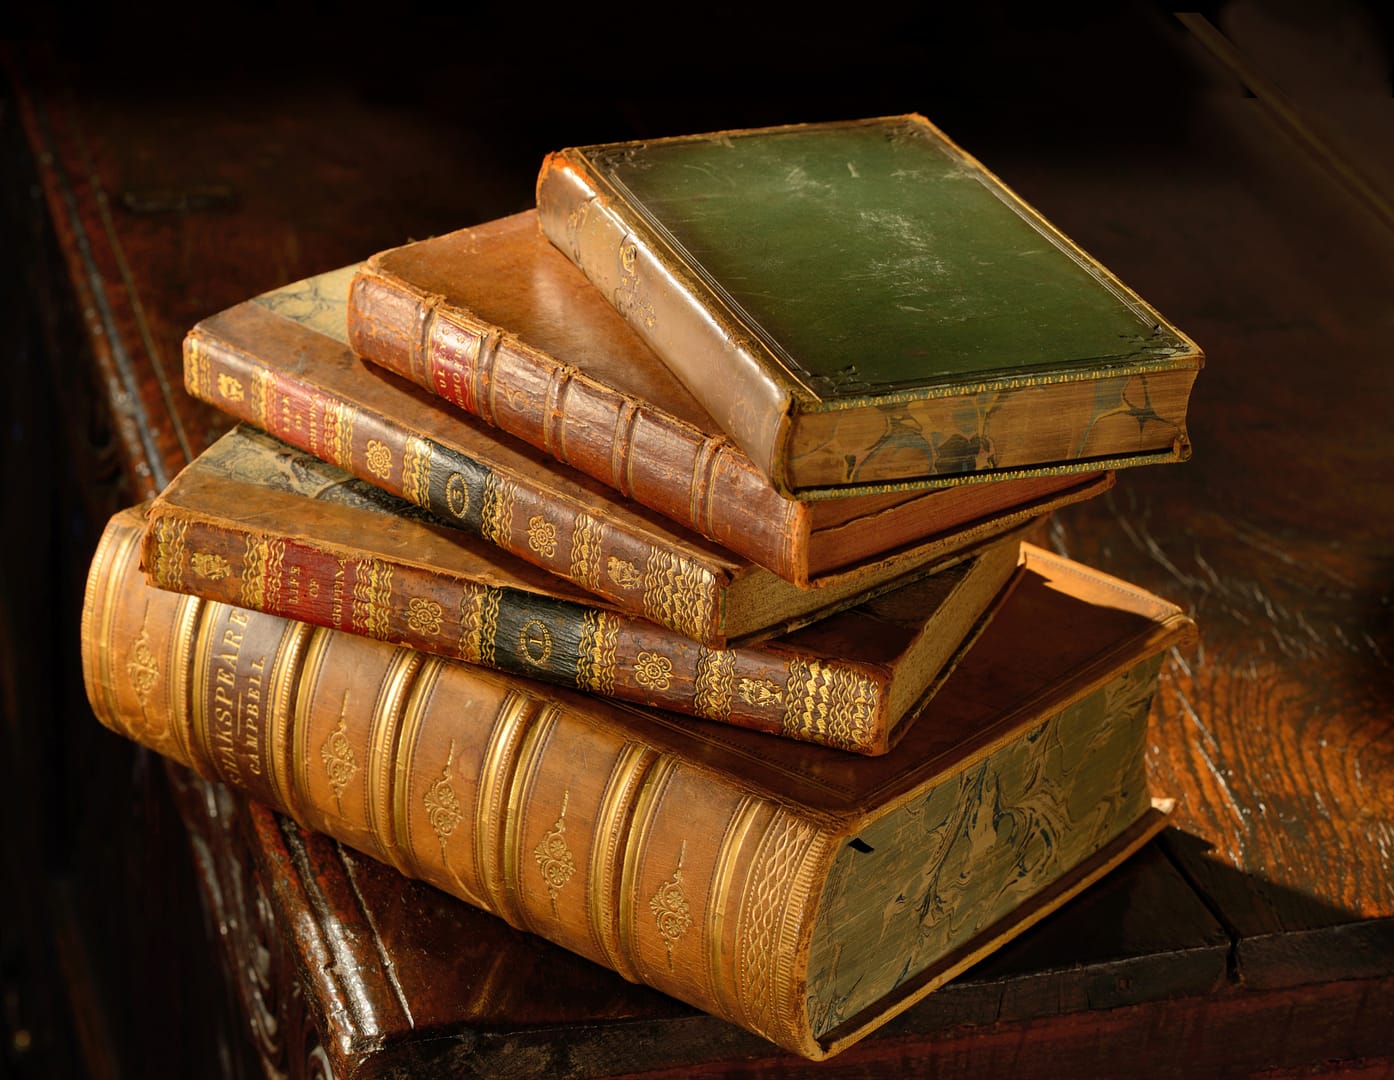 An image of a stack of classic literature books, perfect for celebrating book lovers day